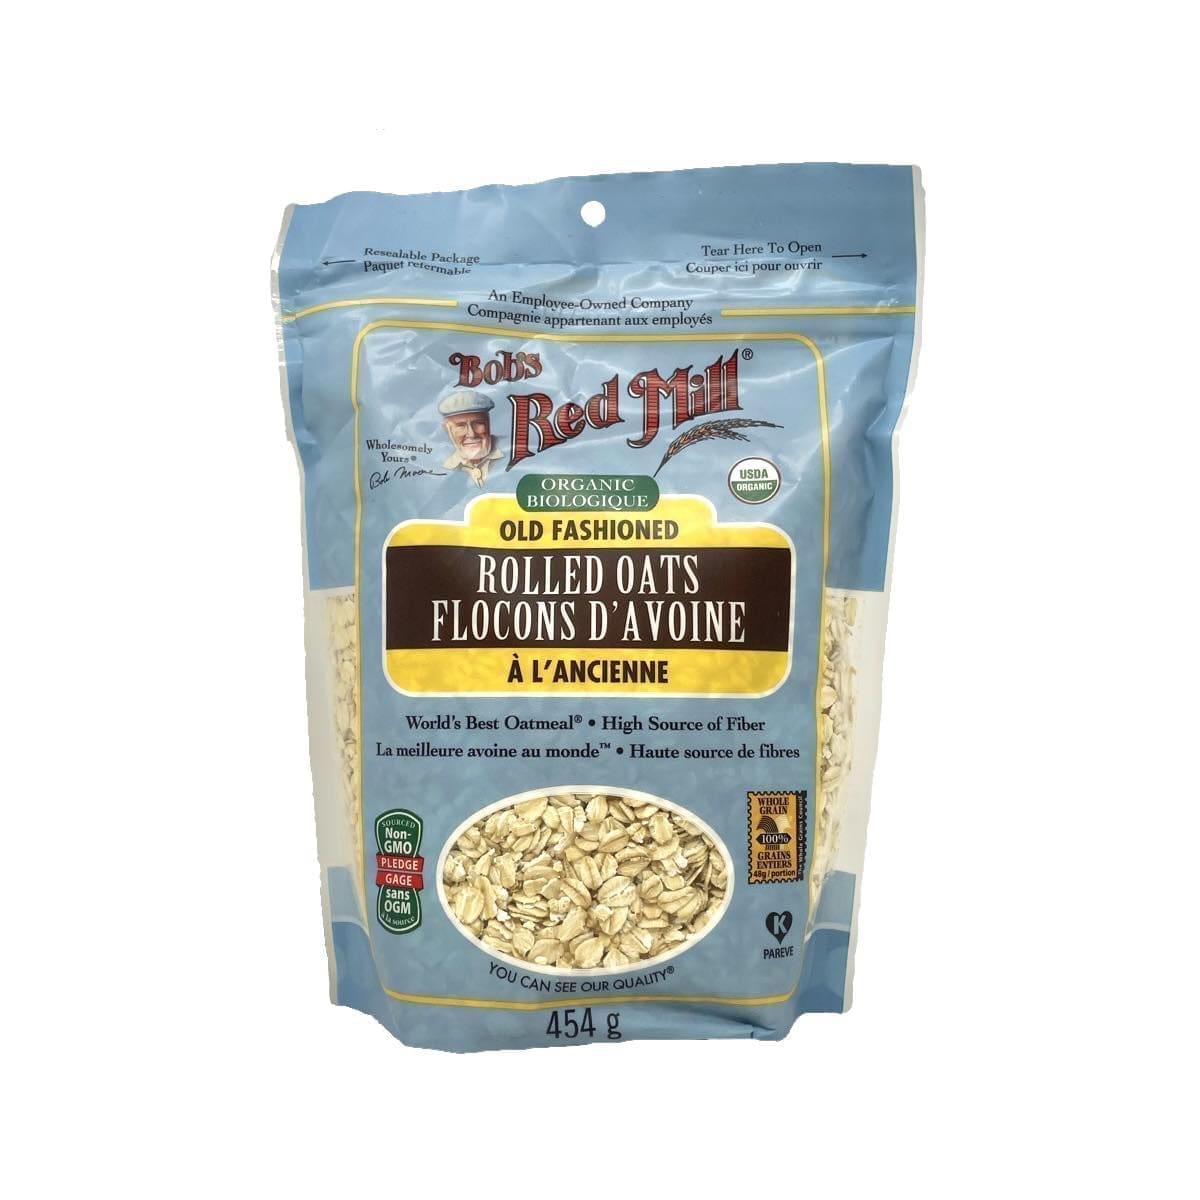 Bob's Red Mill Organic Rolled Oats (454g)